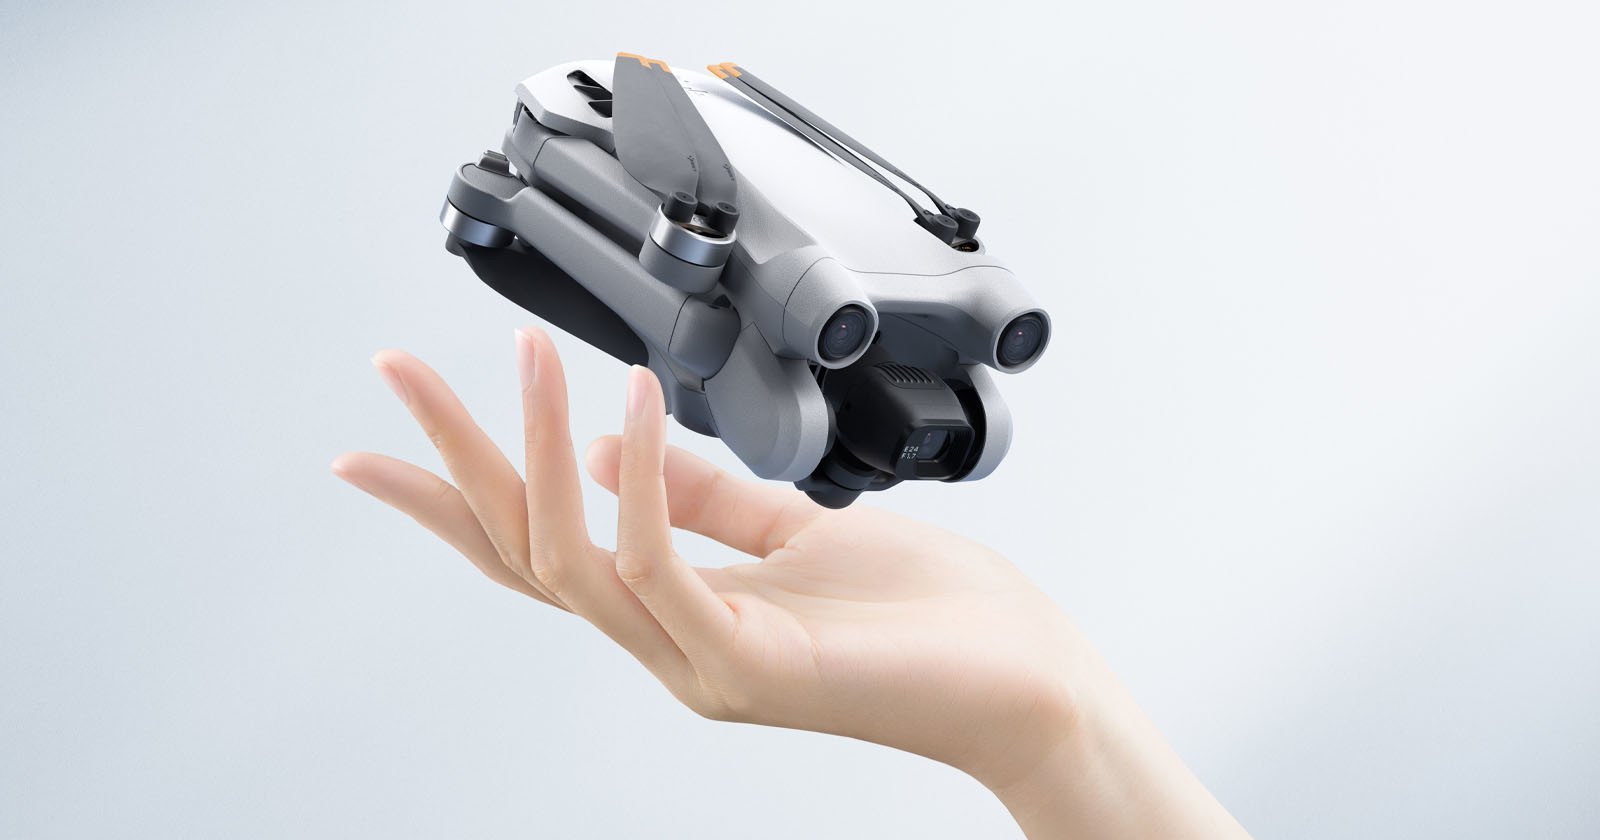 The DJI Mini 3 Pro is a Fully Featured Sub-249g, 48MP, 4K Camera Drone